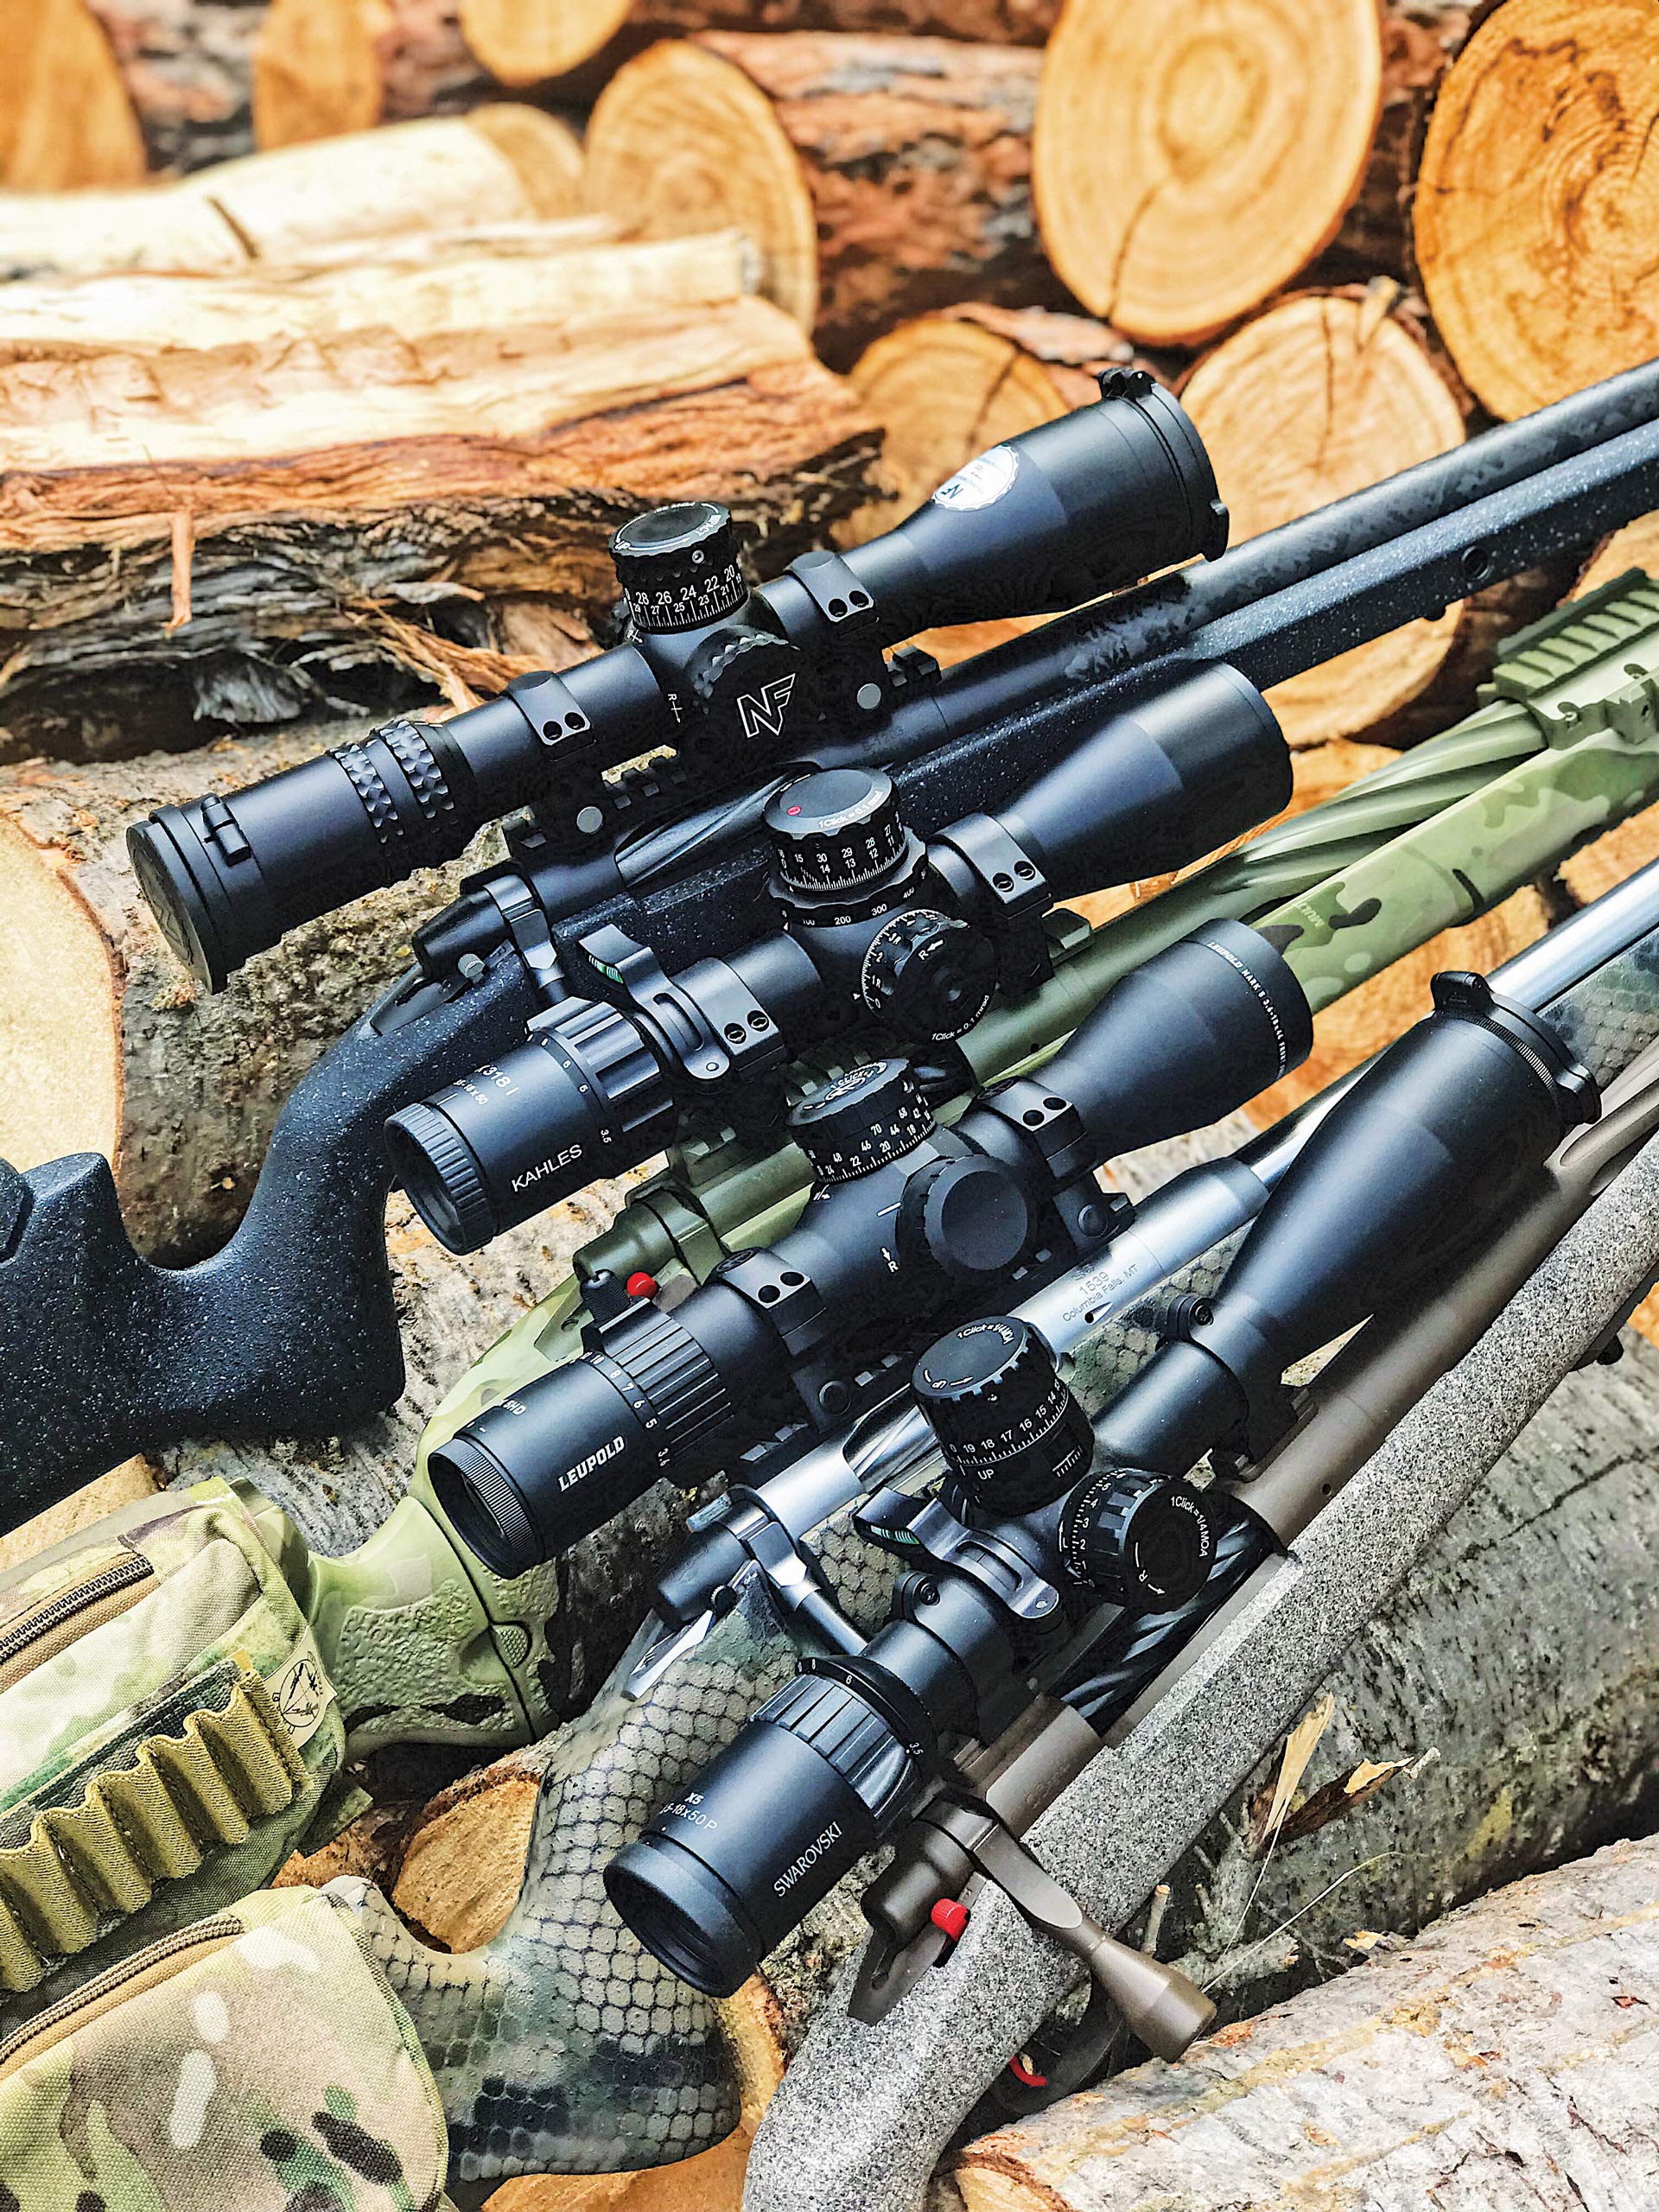 All of the riflescopes that were tested for this article